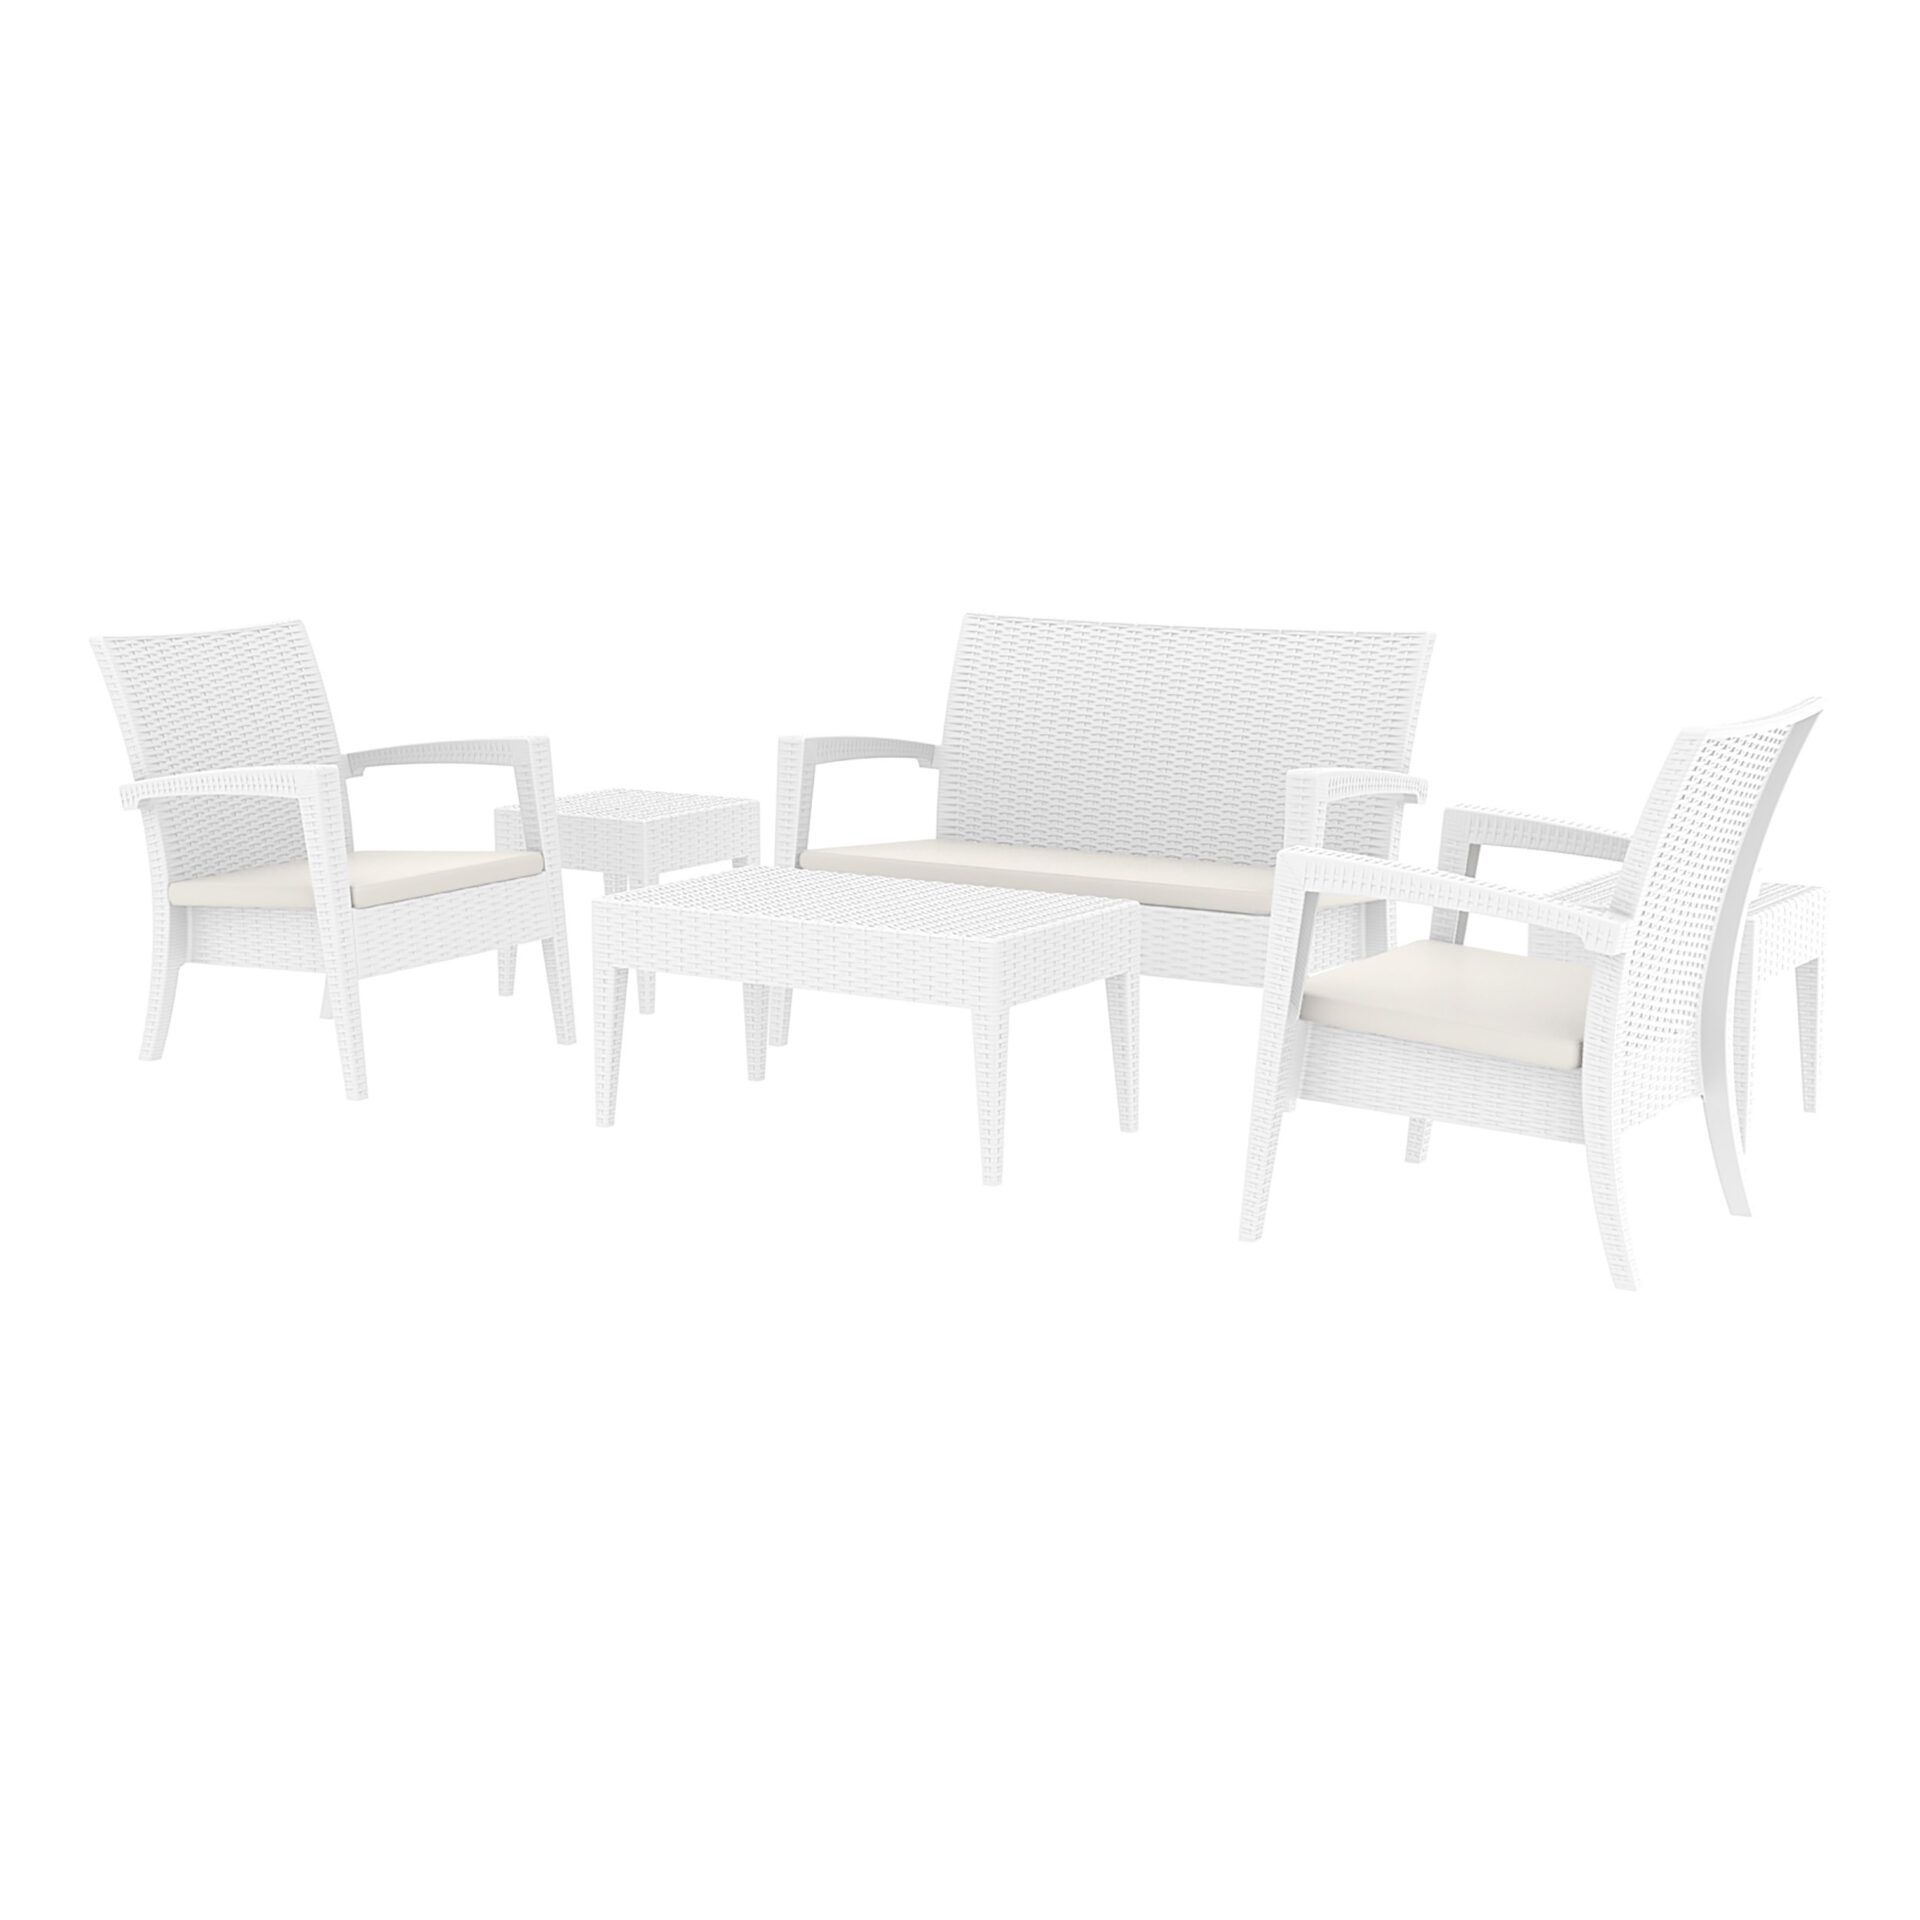 Tequila Lounge Set - White with cushions